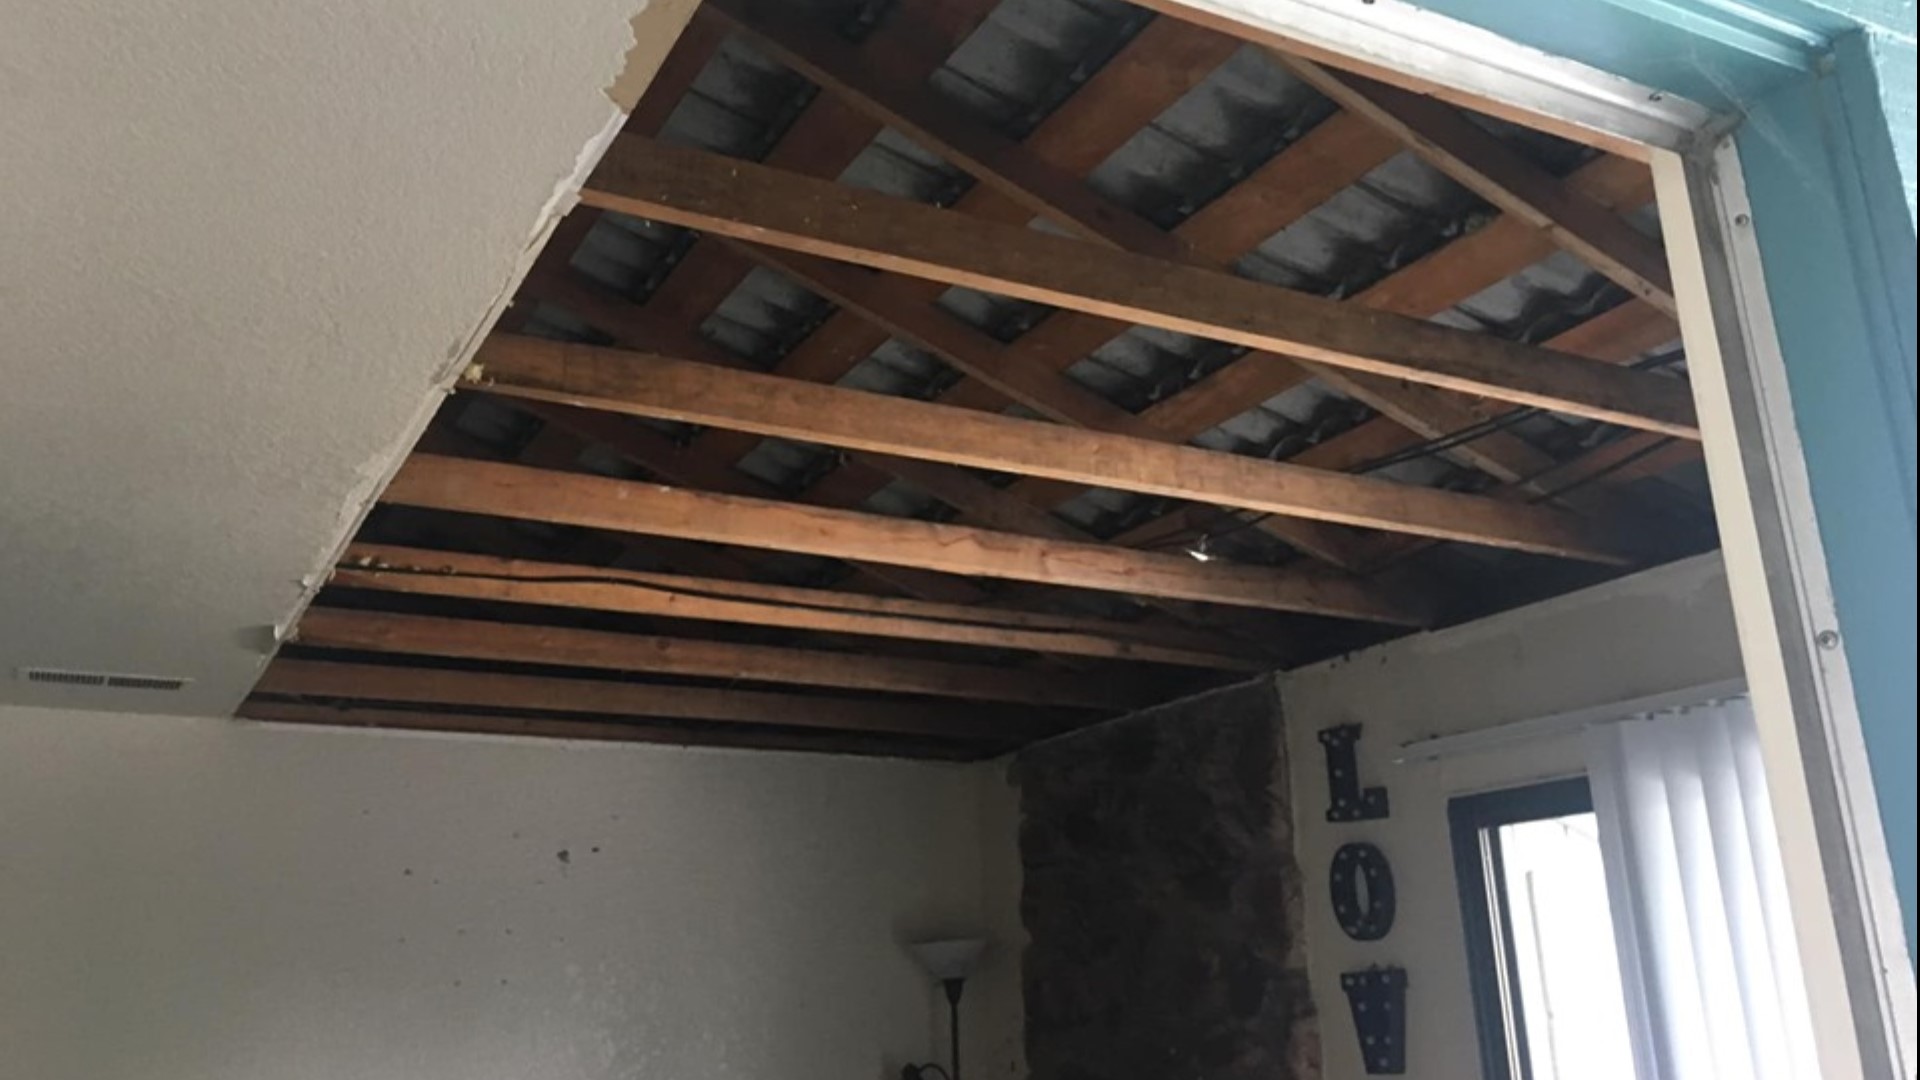 At least, 55 people are being forced to vacate apartments that the City of Stockton deemed "unlivable." The apartments saw intense ceiling and roof damage from Sunday's storm.